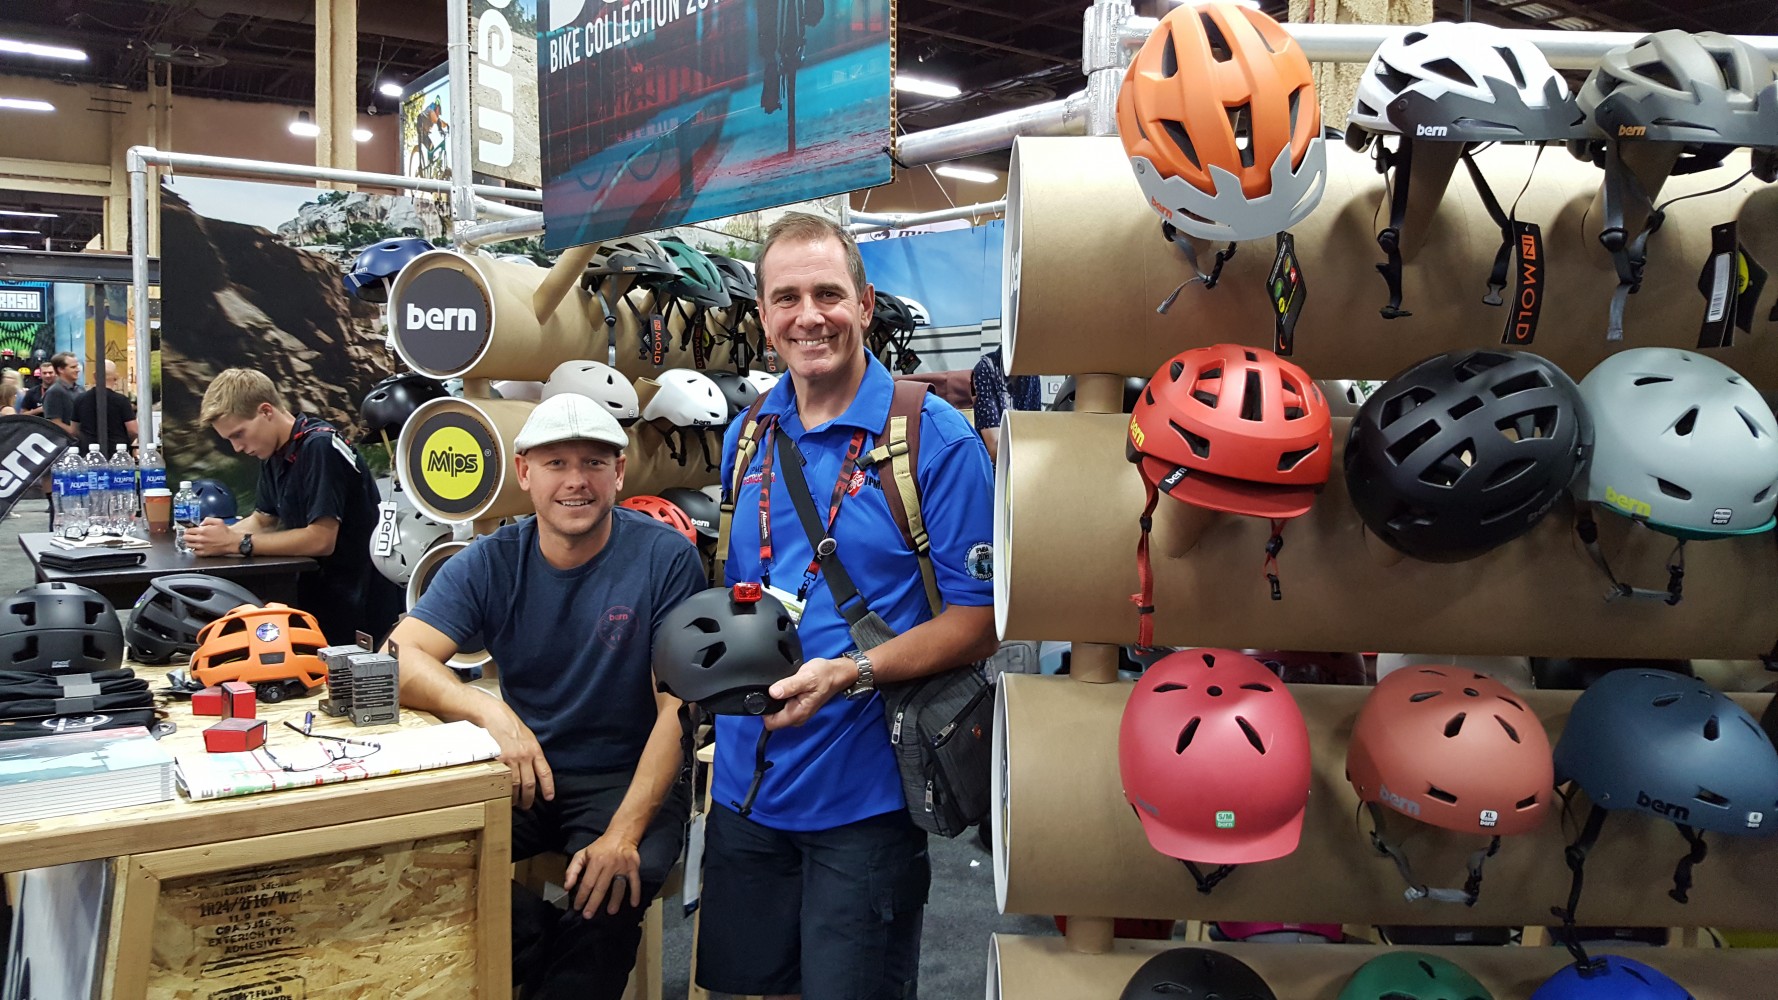 Interbike 2016:  The “Who’s Who” of the Bicycle Industry